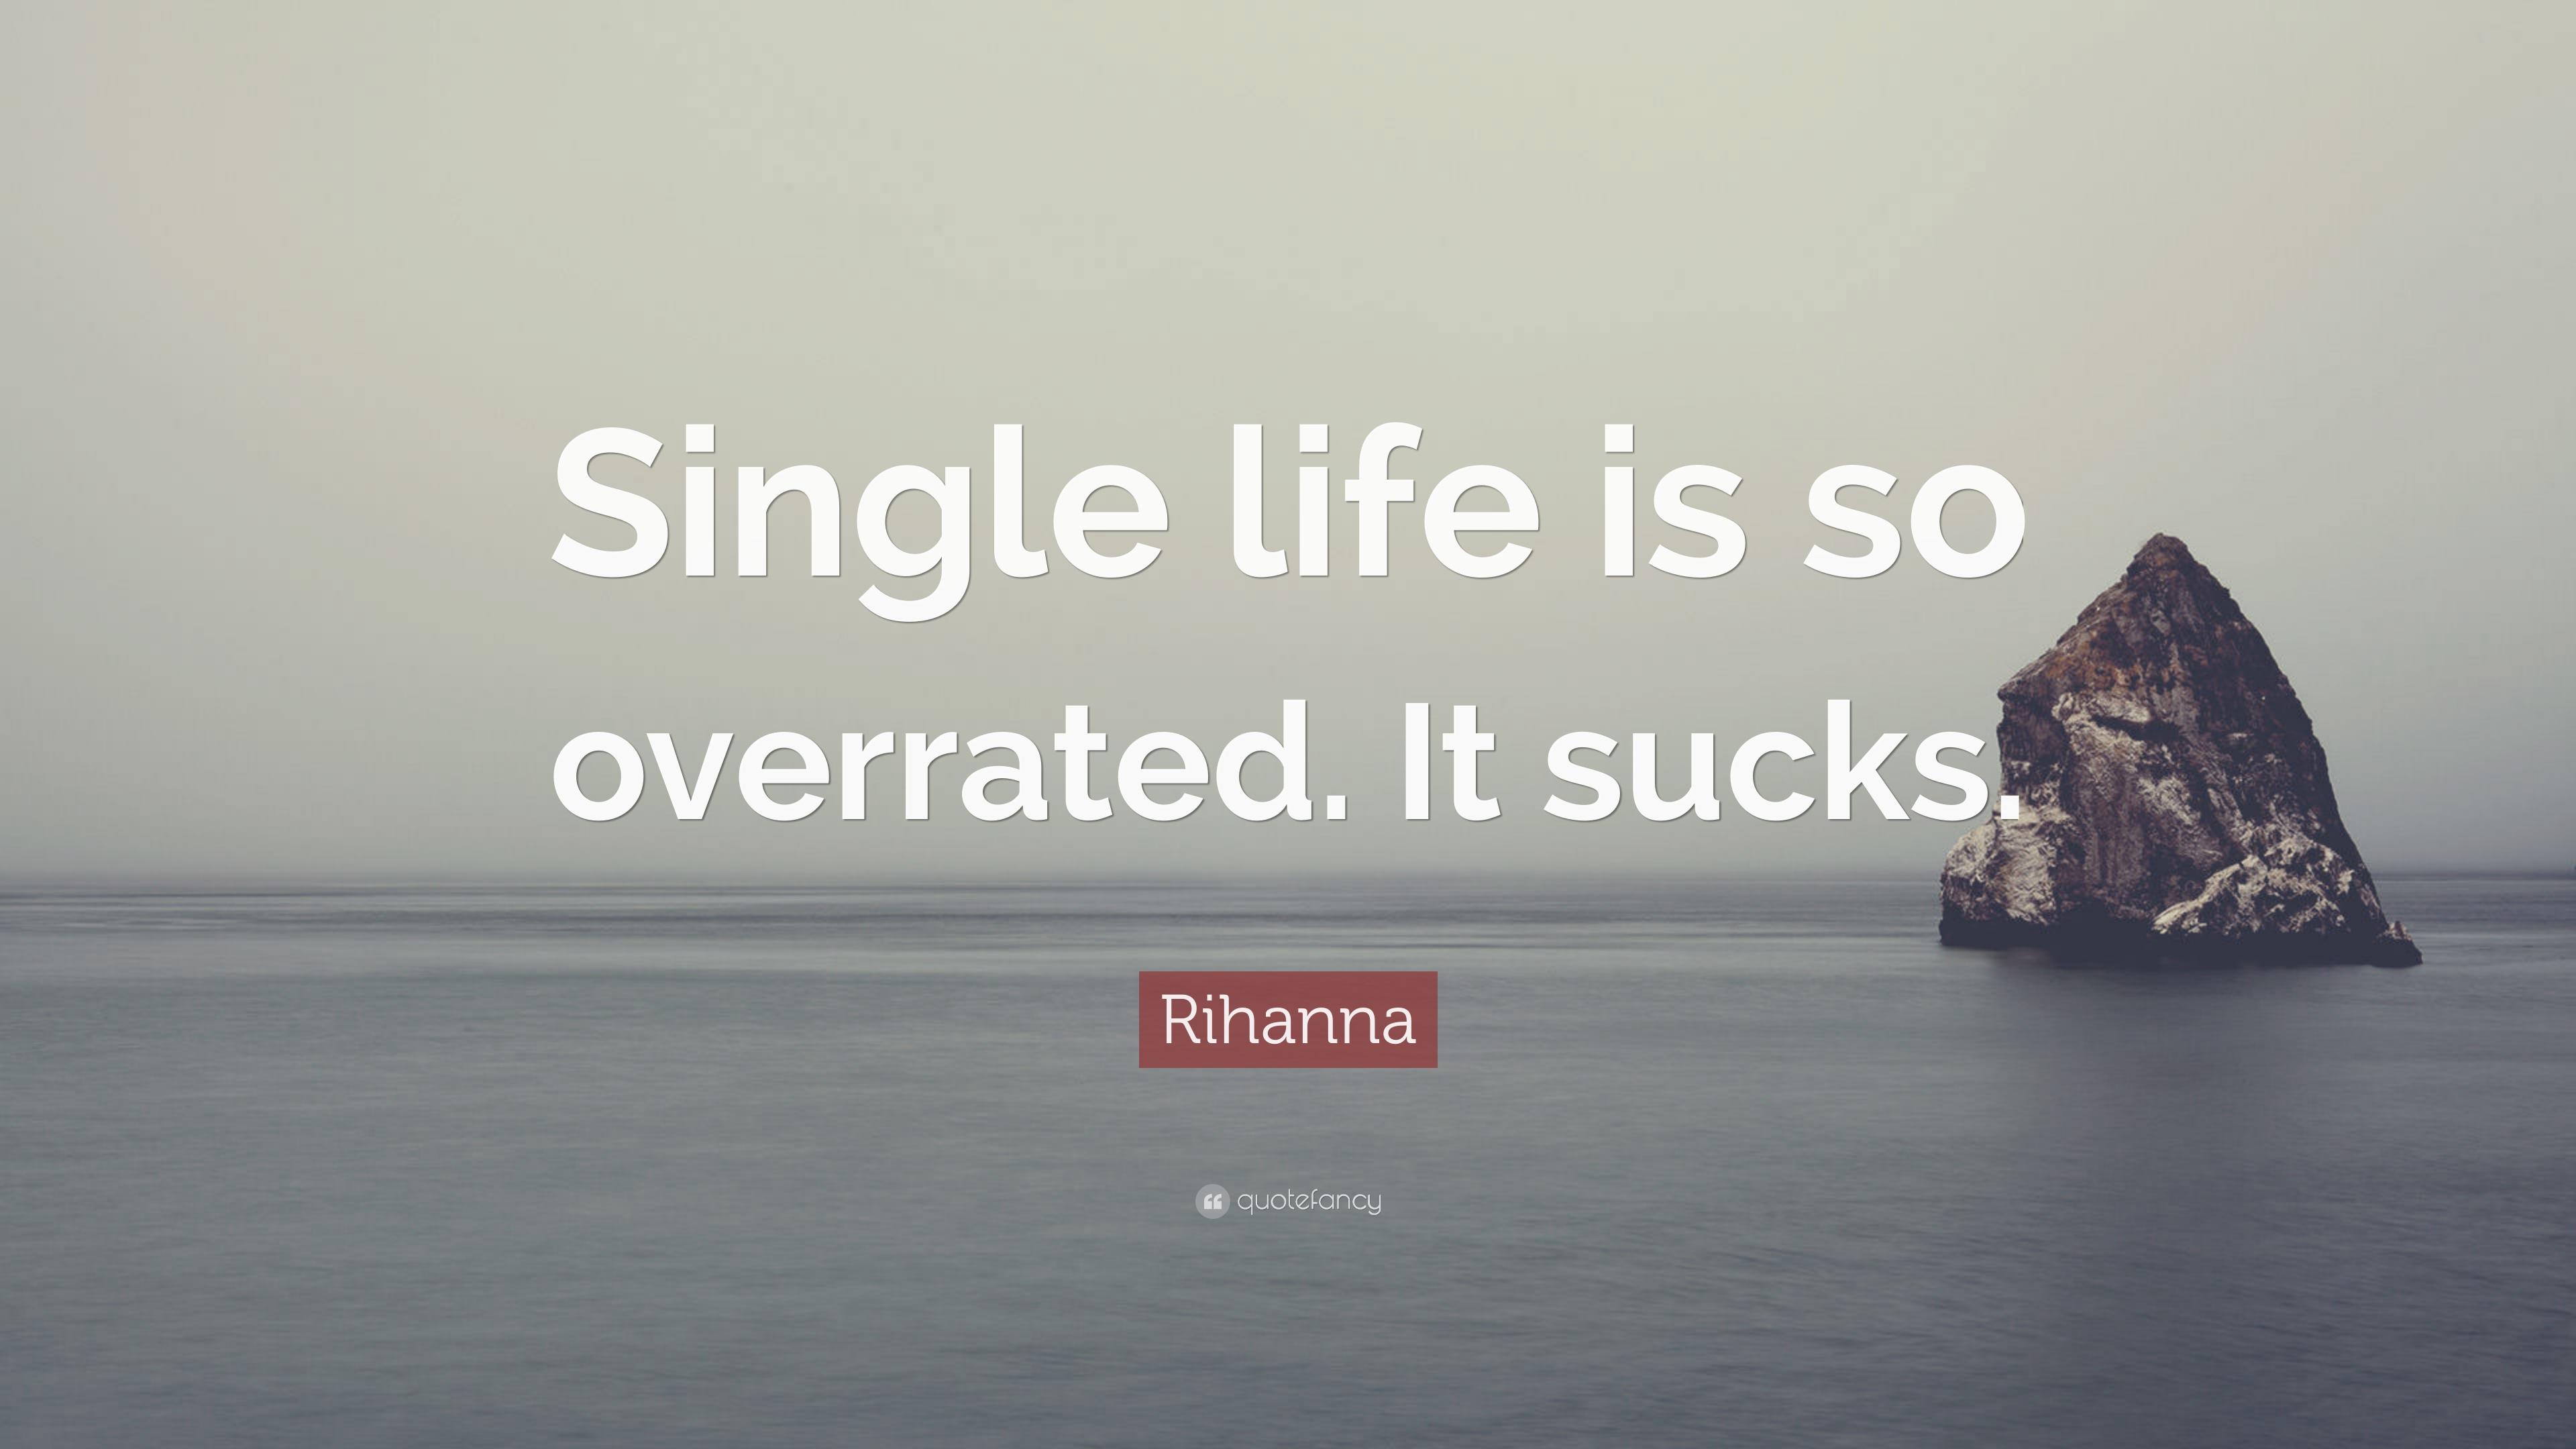 Rihanna Quote: “Single life is so overrated. It sucks.” 12